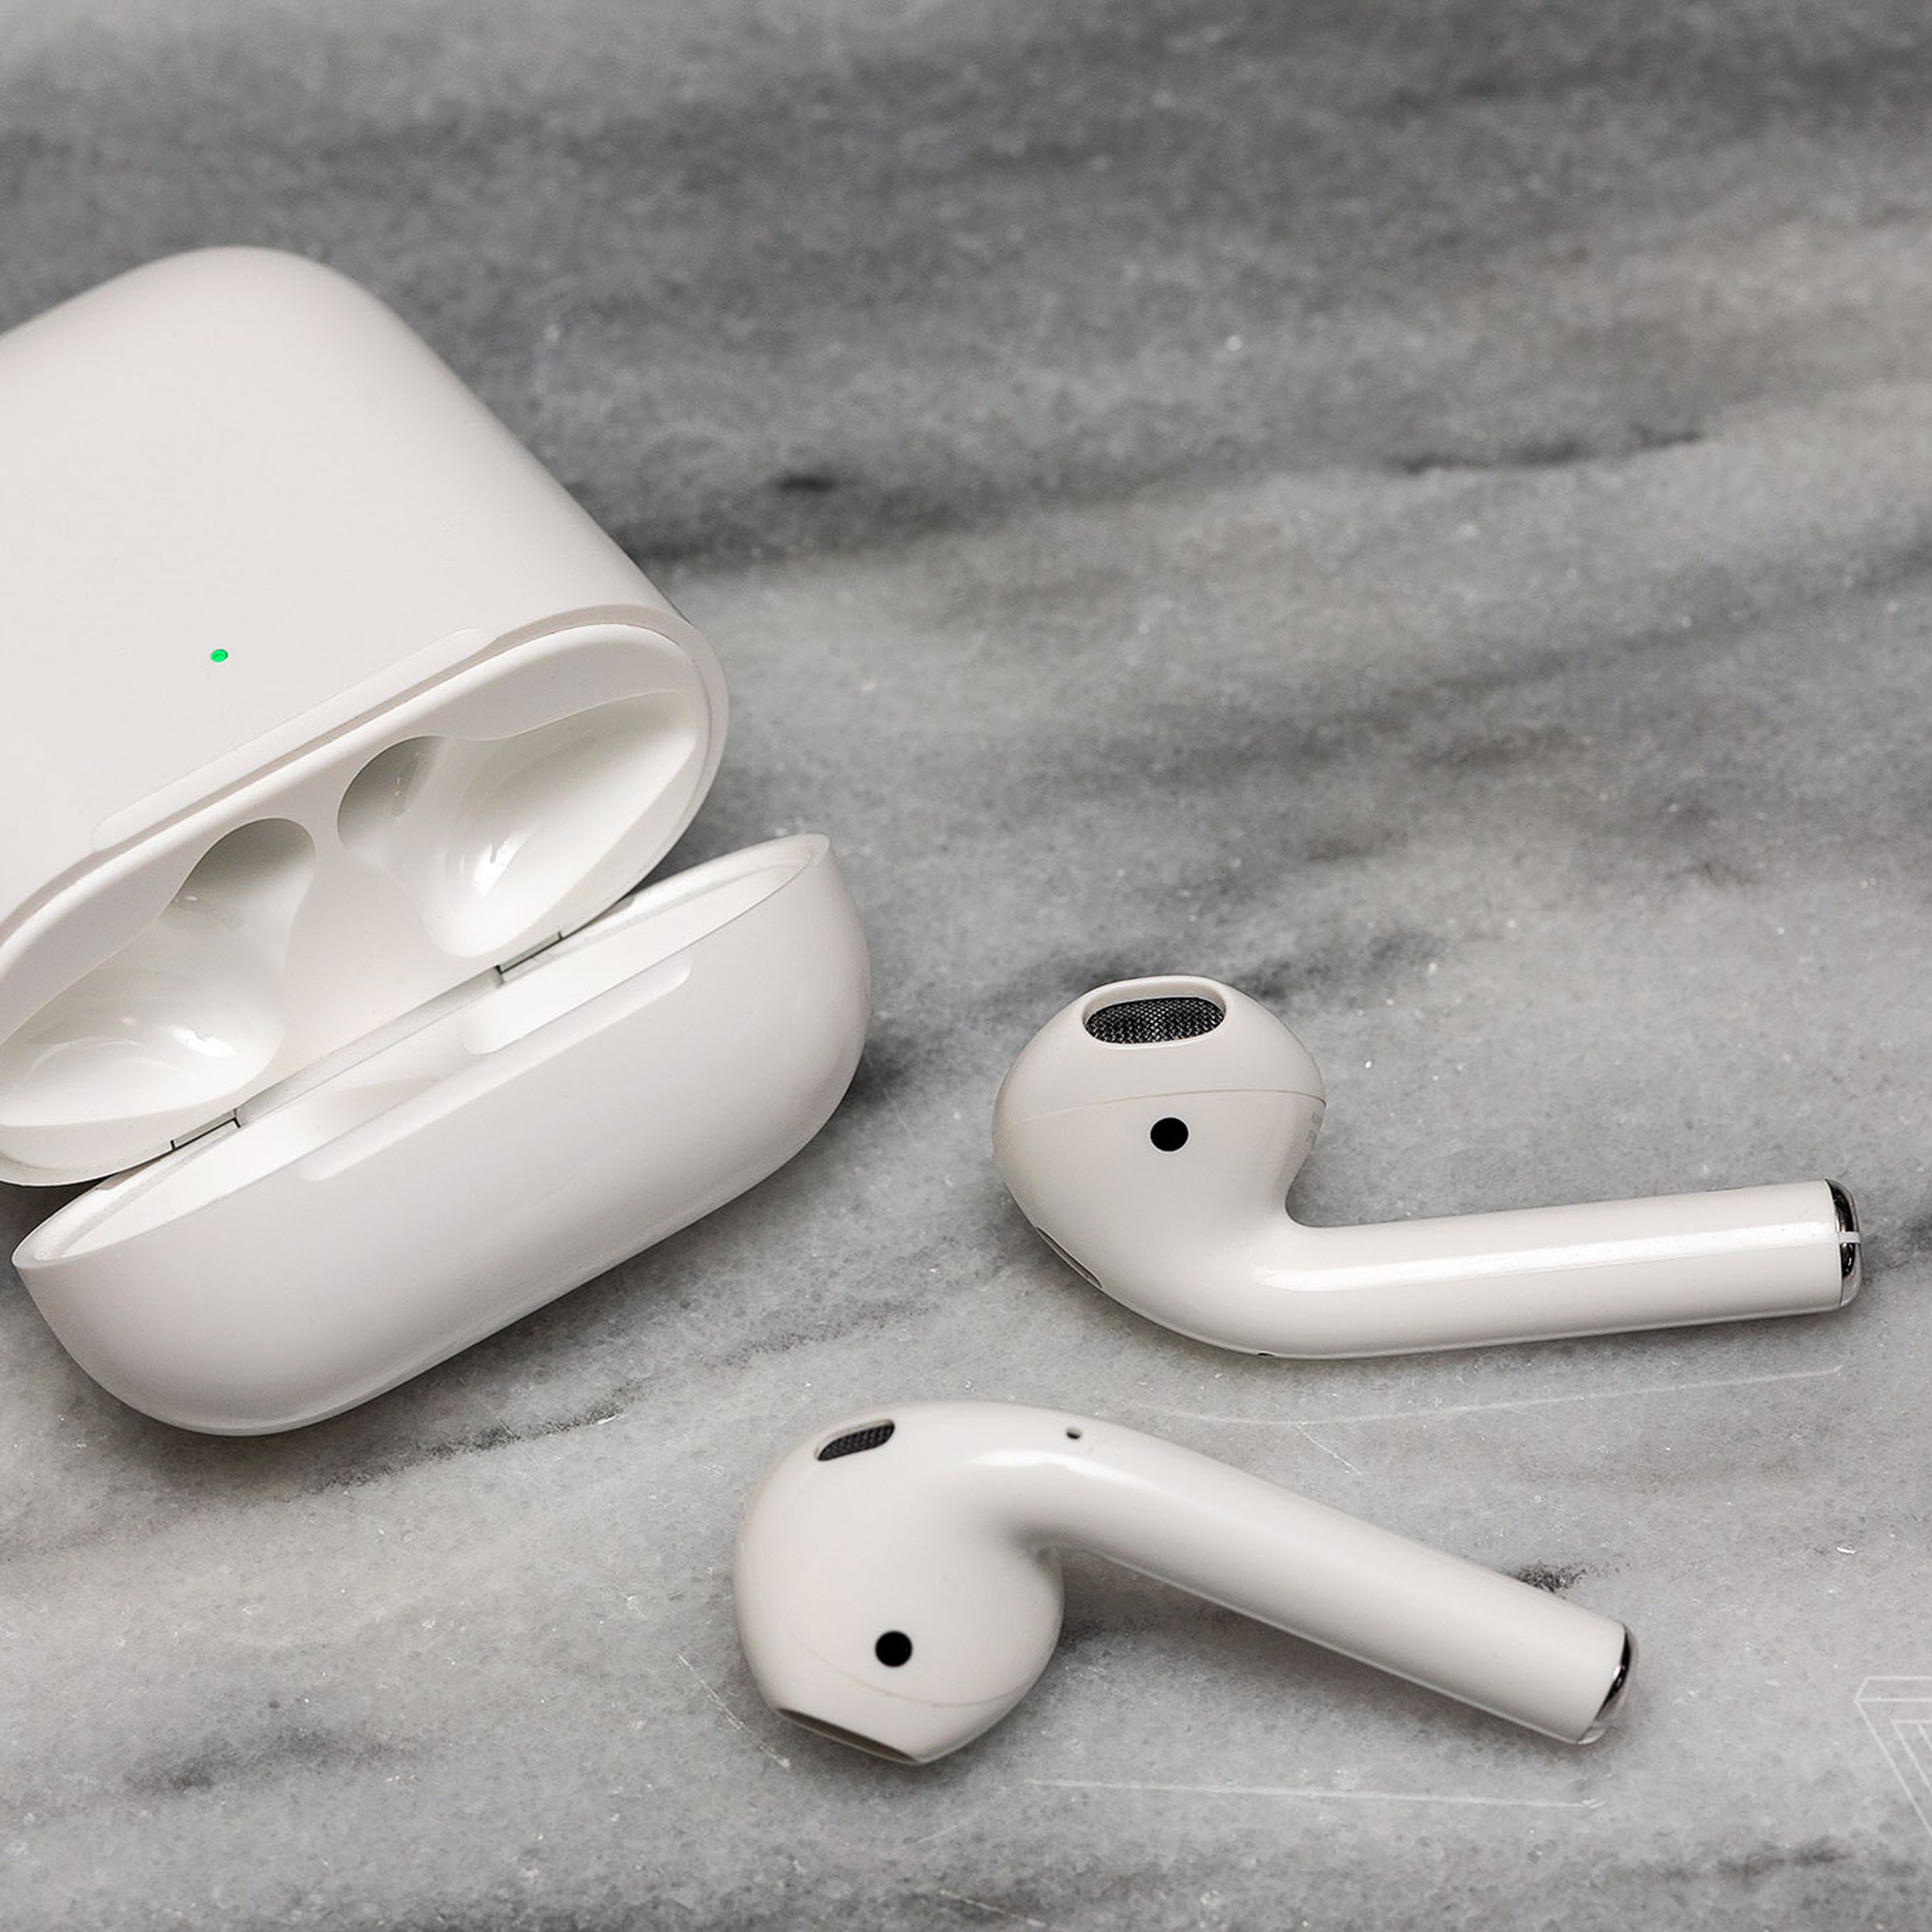 The second-generation AirPods near their charging case on a white surface.